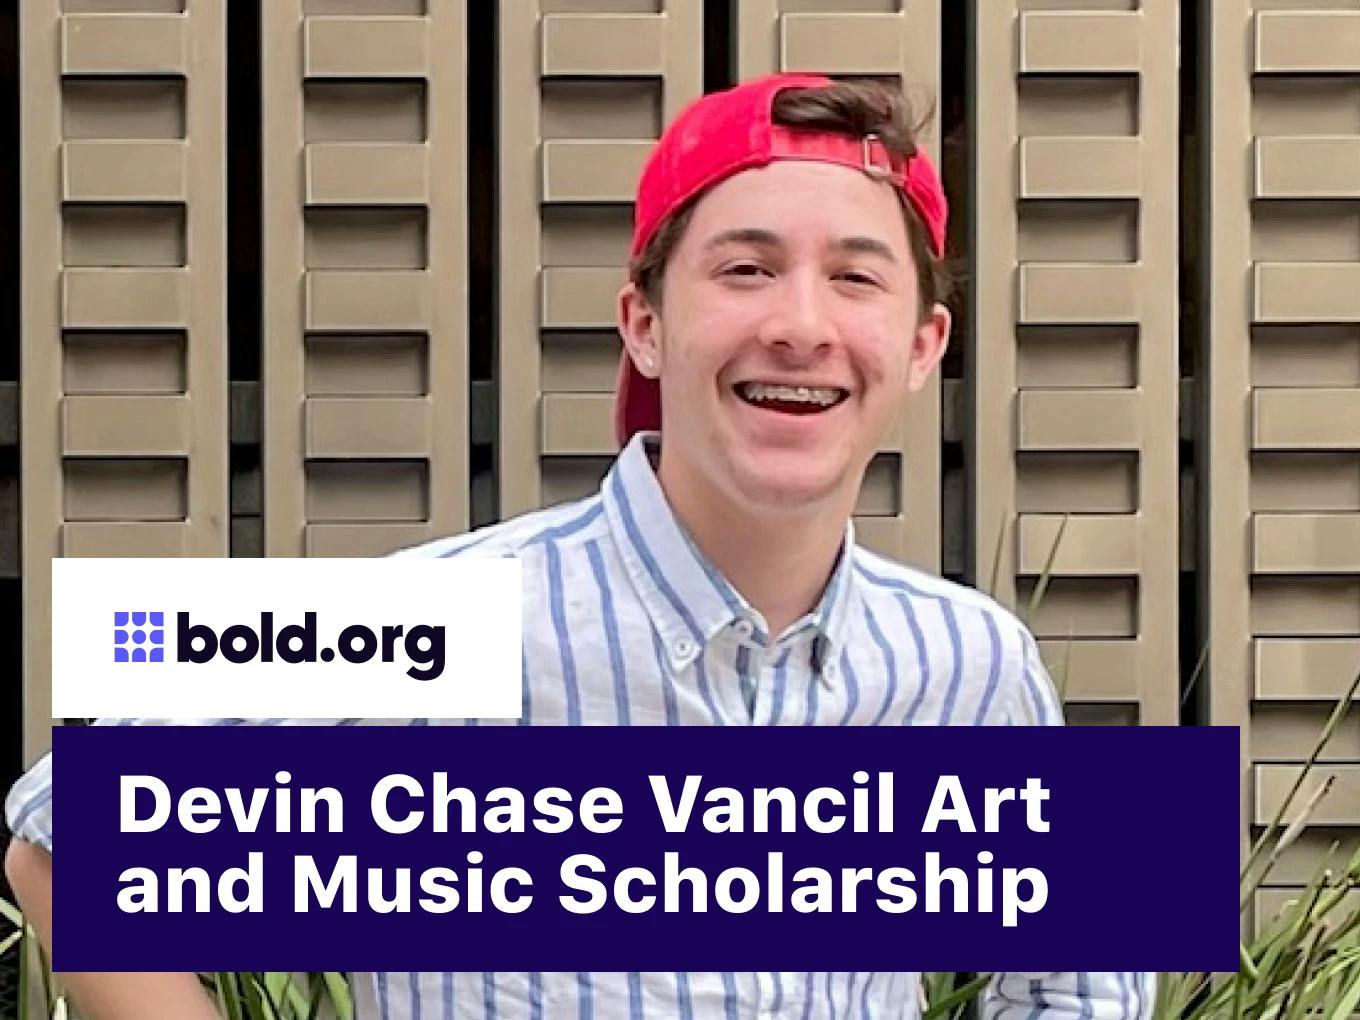 Devin Chase Vancil Art and Music Scholarship